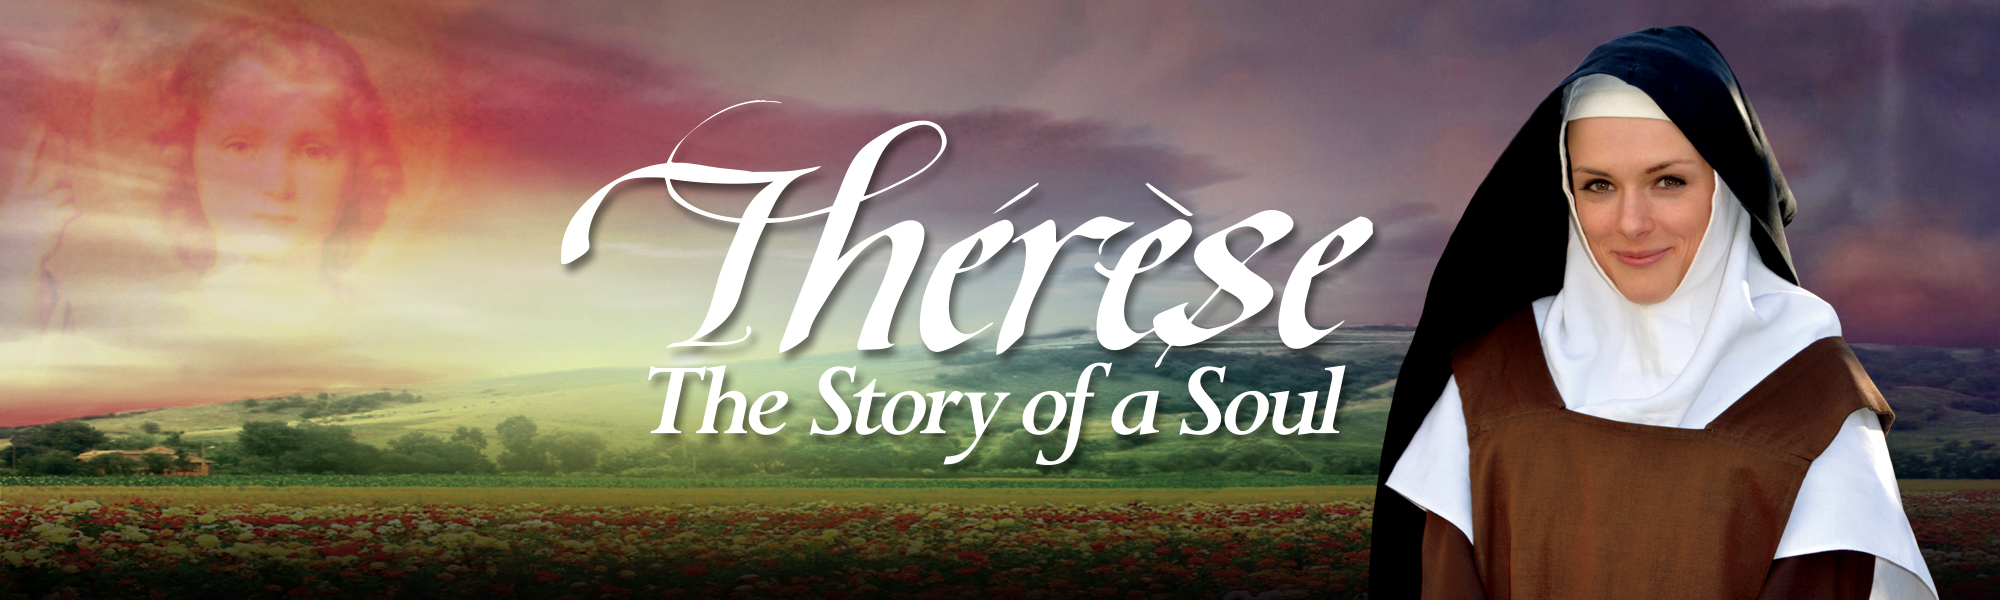 The Actress | Therese: The Story of a Soul